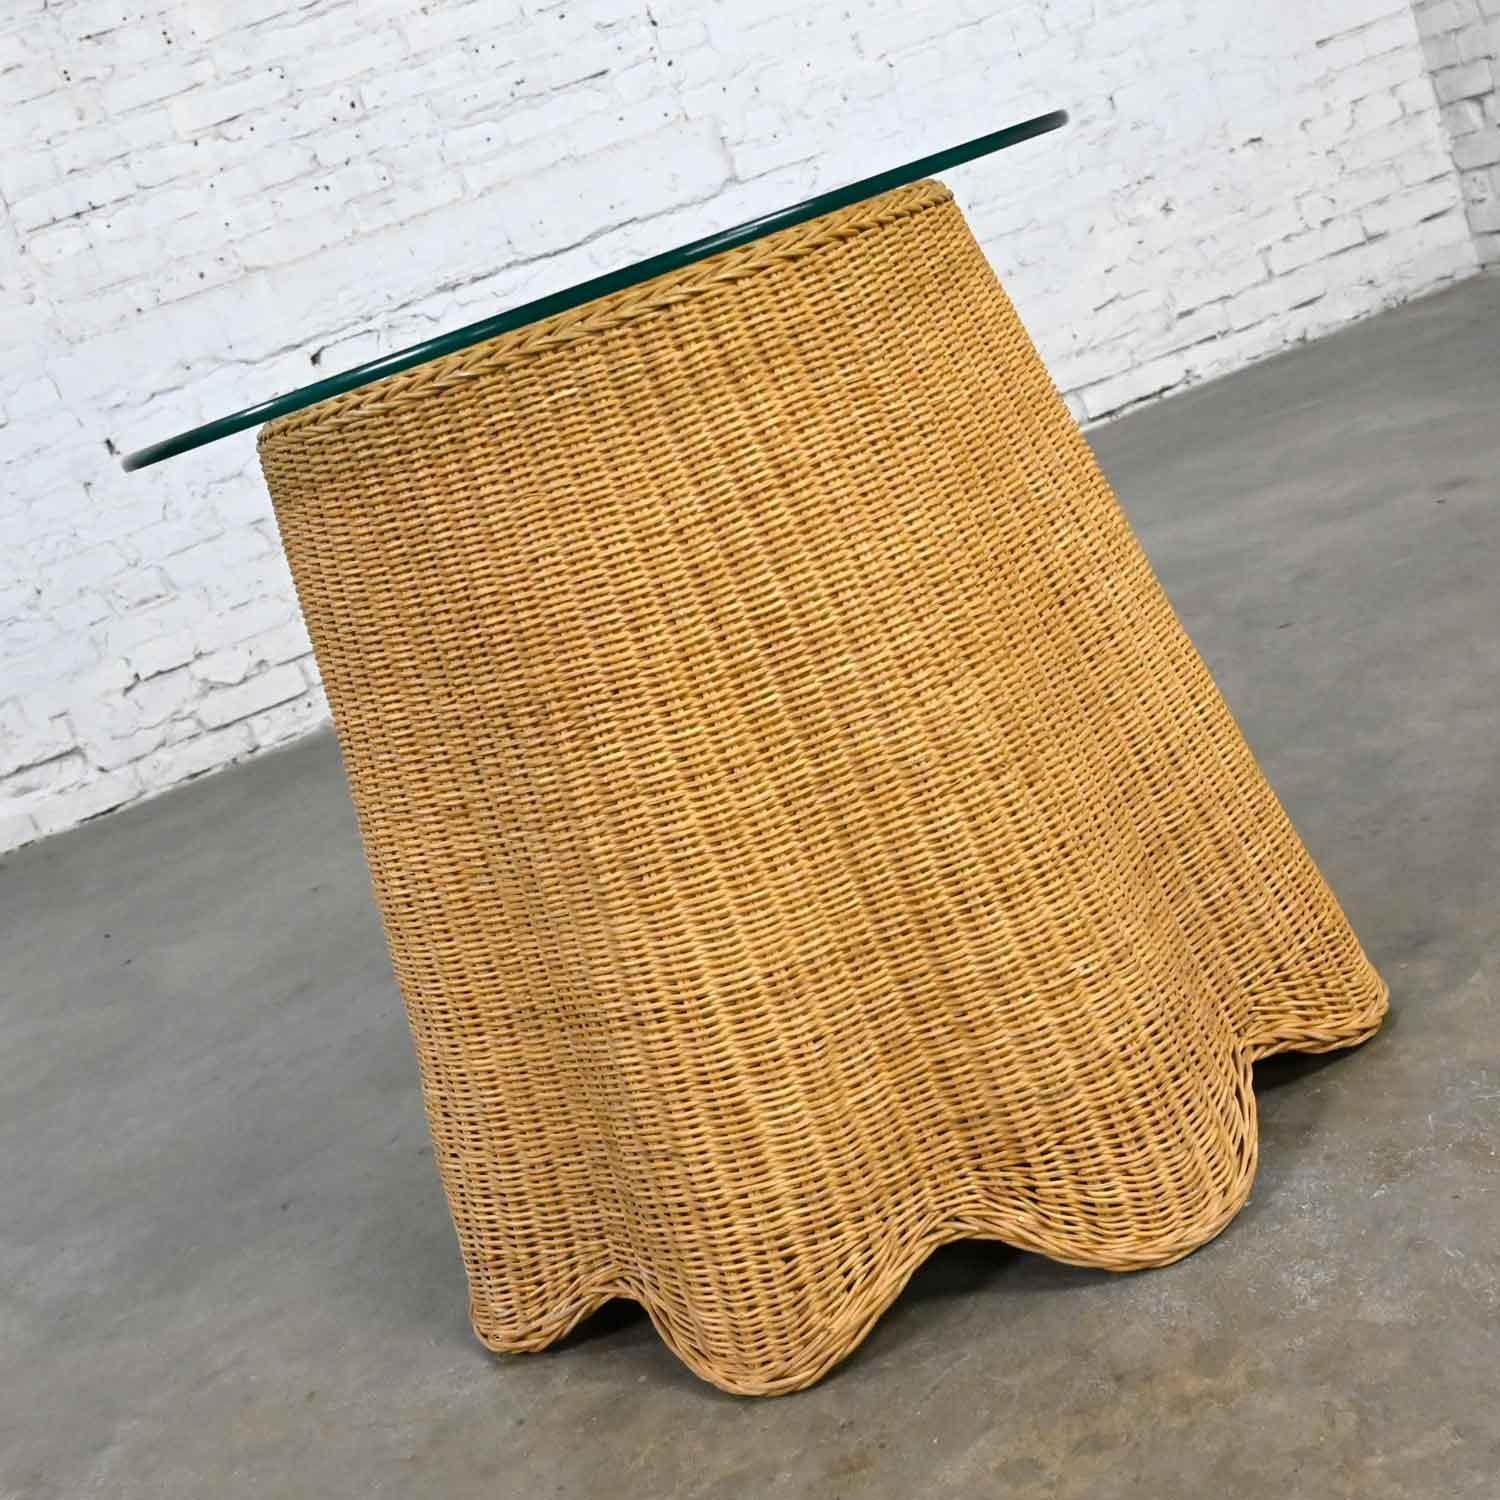 Organic Modern Vintage Trompe L’oeil Draped Wicker End or Side Table with Round Glass Top